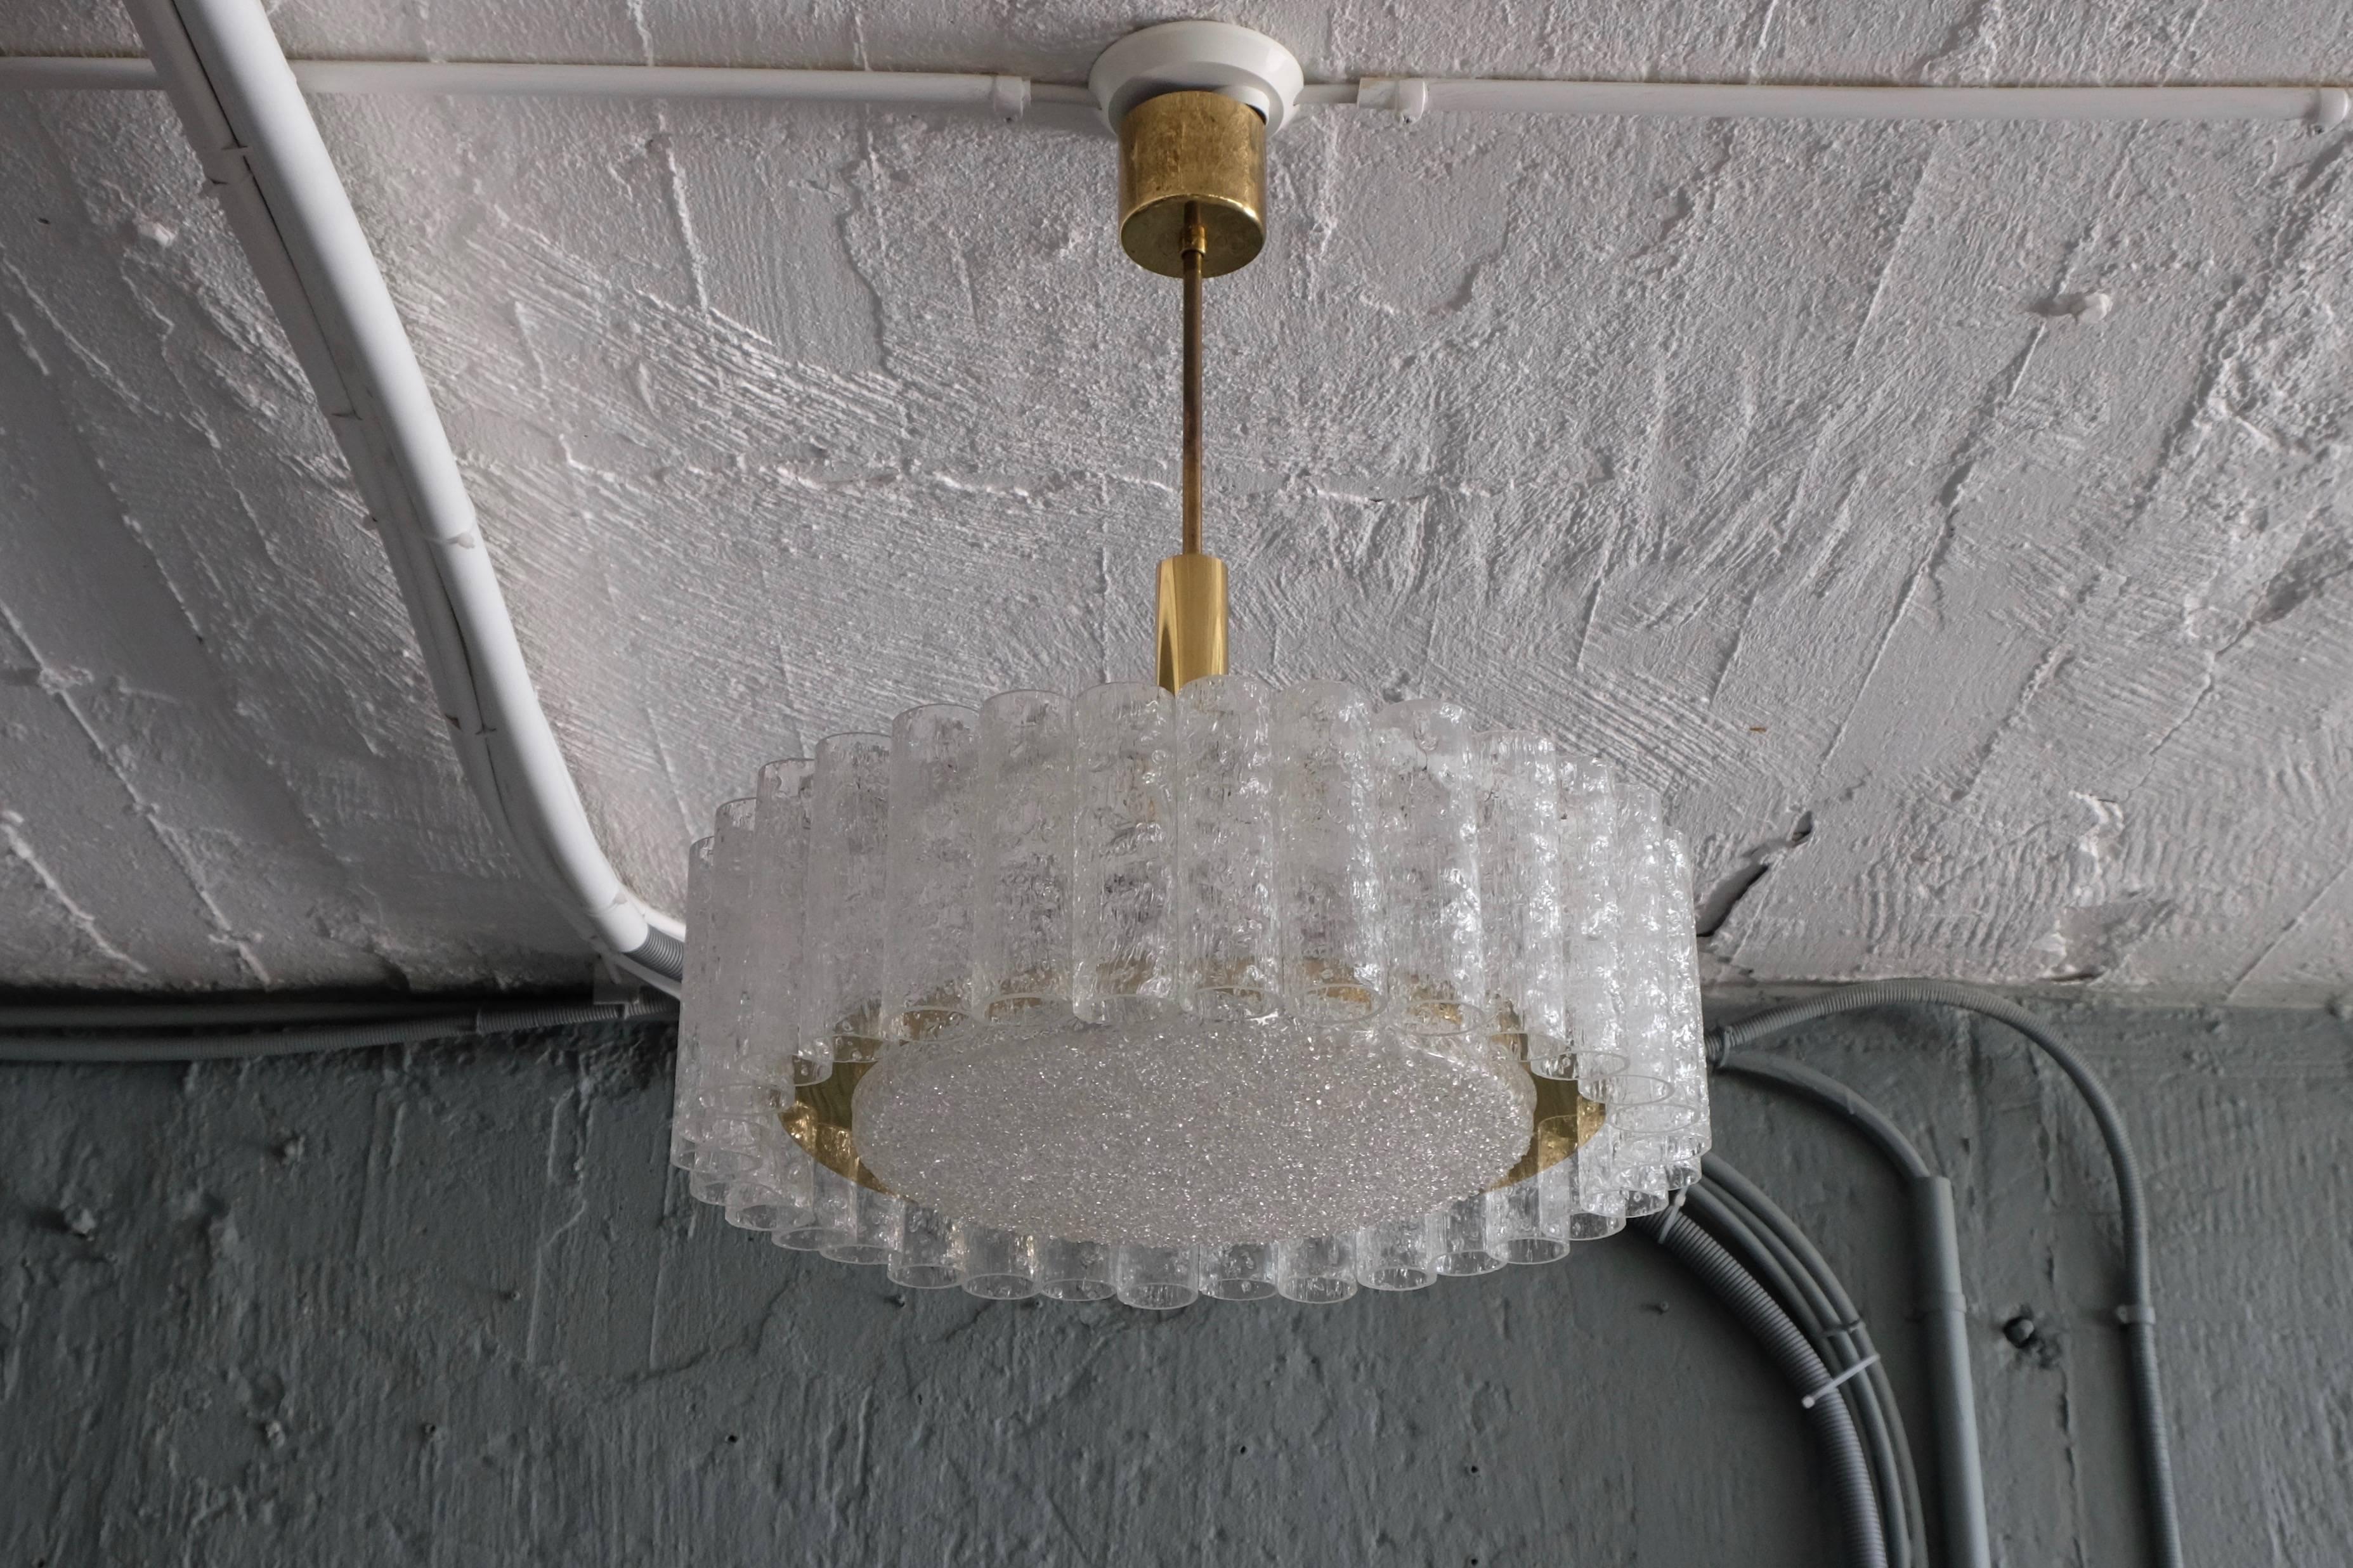 Midcentury Doria chandelier, Murano glass tubes surrounding a brass ring and structured glass disc. This is a variation of the model 4126, which received the prestigious German design excellence award IF (Industrieform) in 1968.
Six standard size